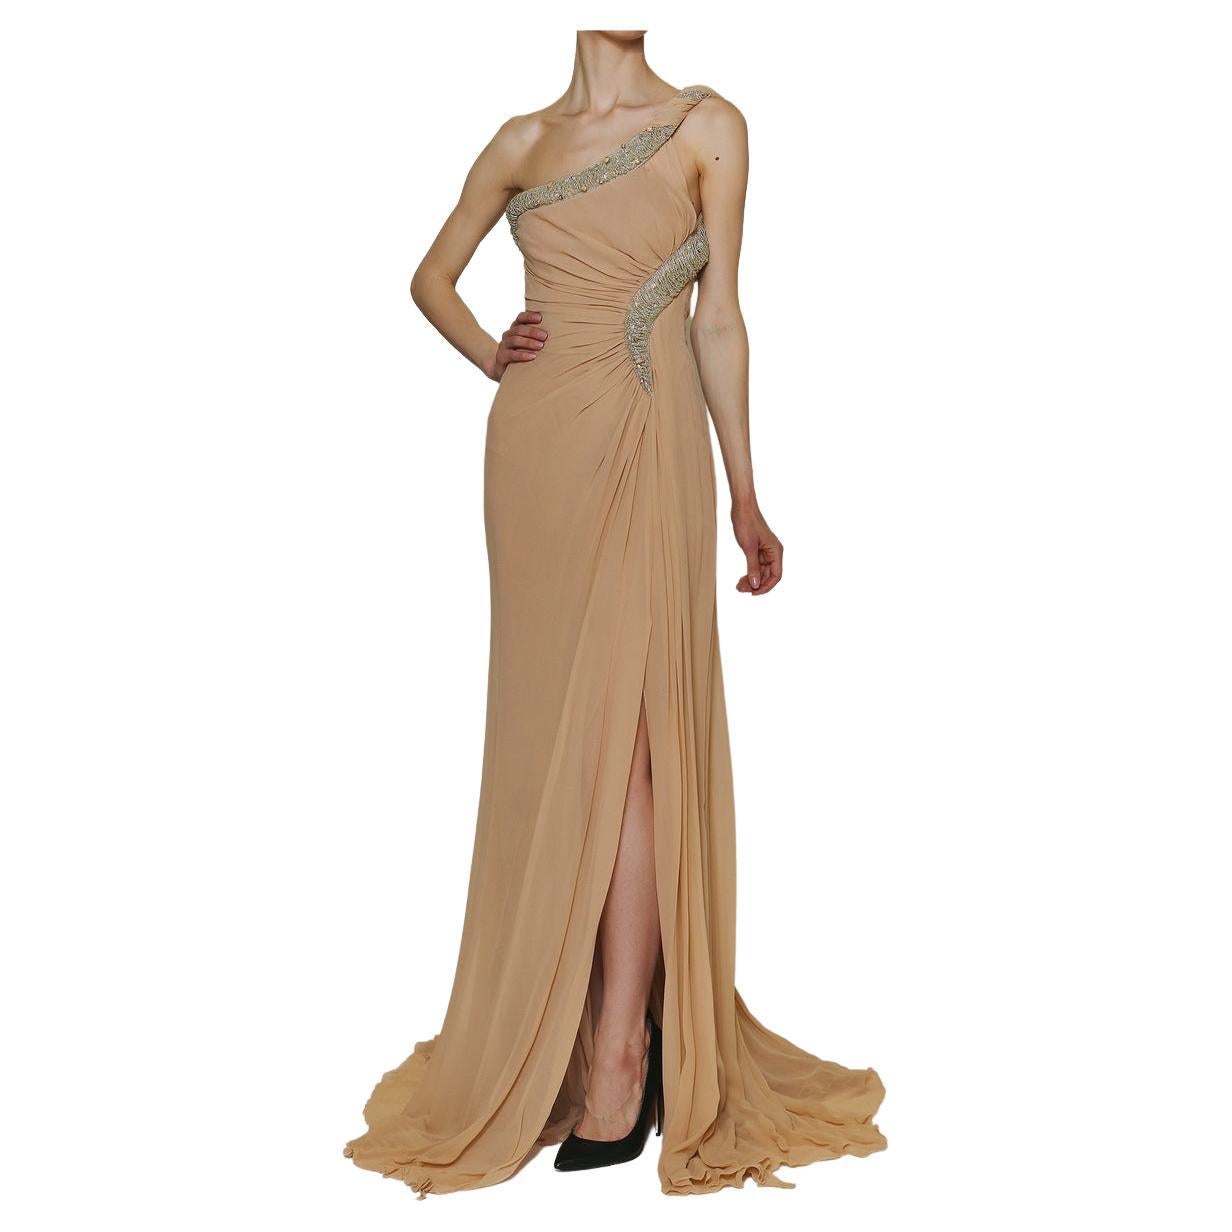 ROBERTO CAVALLI 

BEIGE SILK BEADED Gown DRESS

Content: silk, beads

Size M

Made in Italy

Pre- owned in excellent condition
 100% authentic guarantee 

       PLEASE VISIT OUR STORE FOR MORE GREAT ITEMS 


rebb